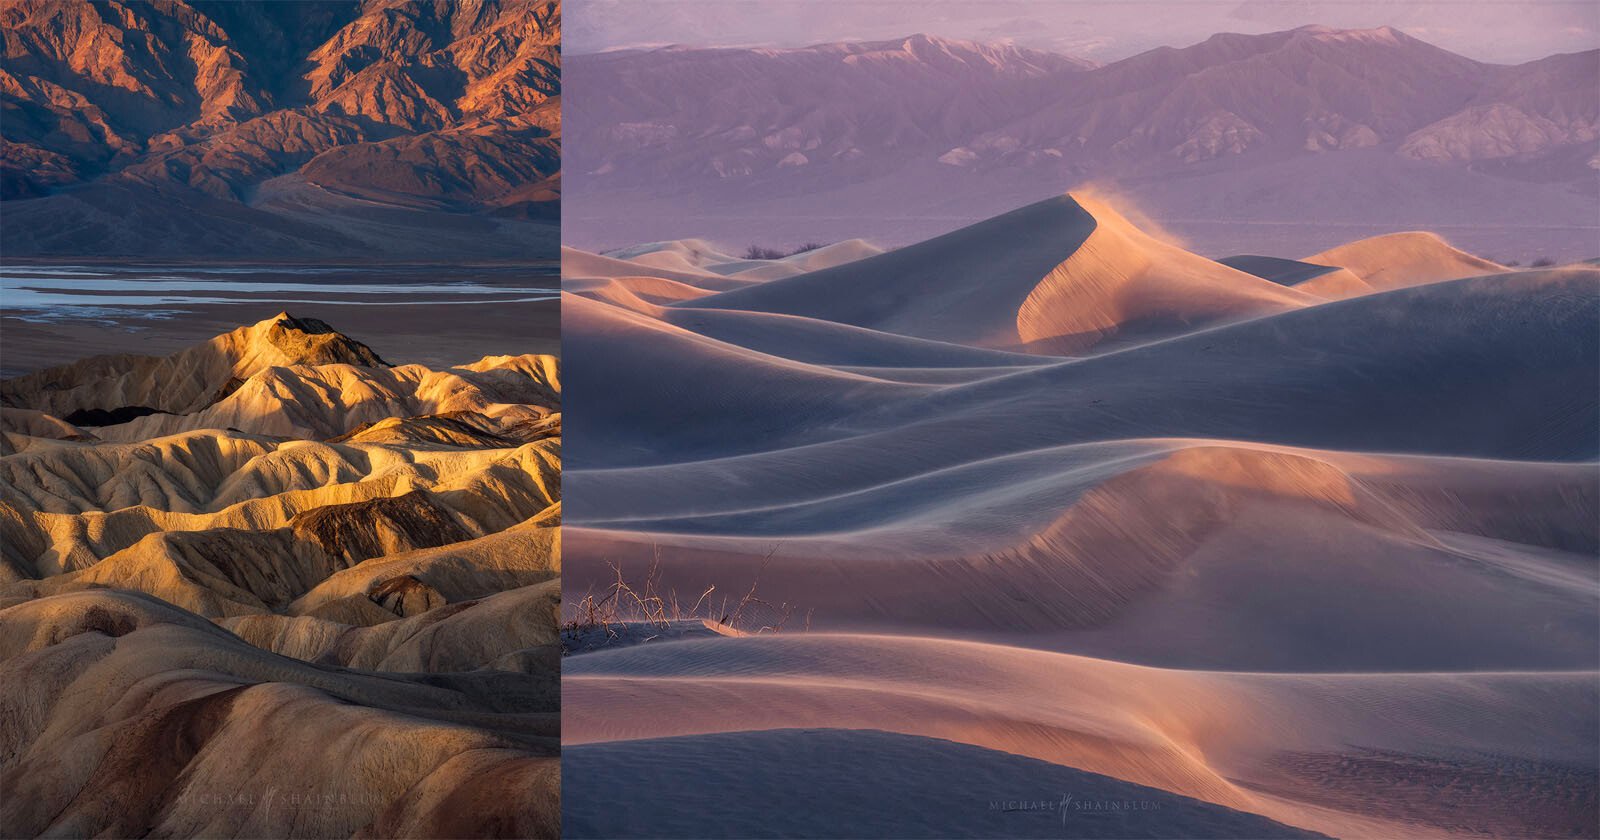  how properly scout locations get gorgeous landscape photos 